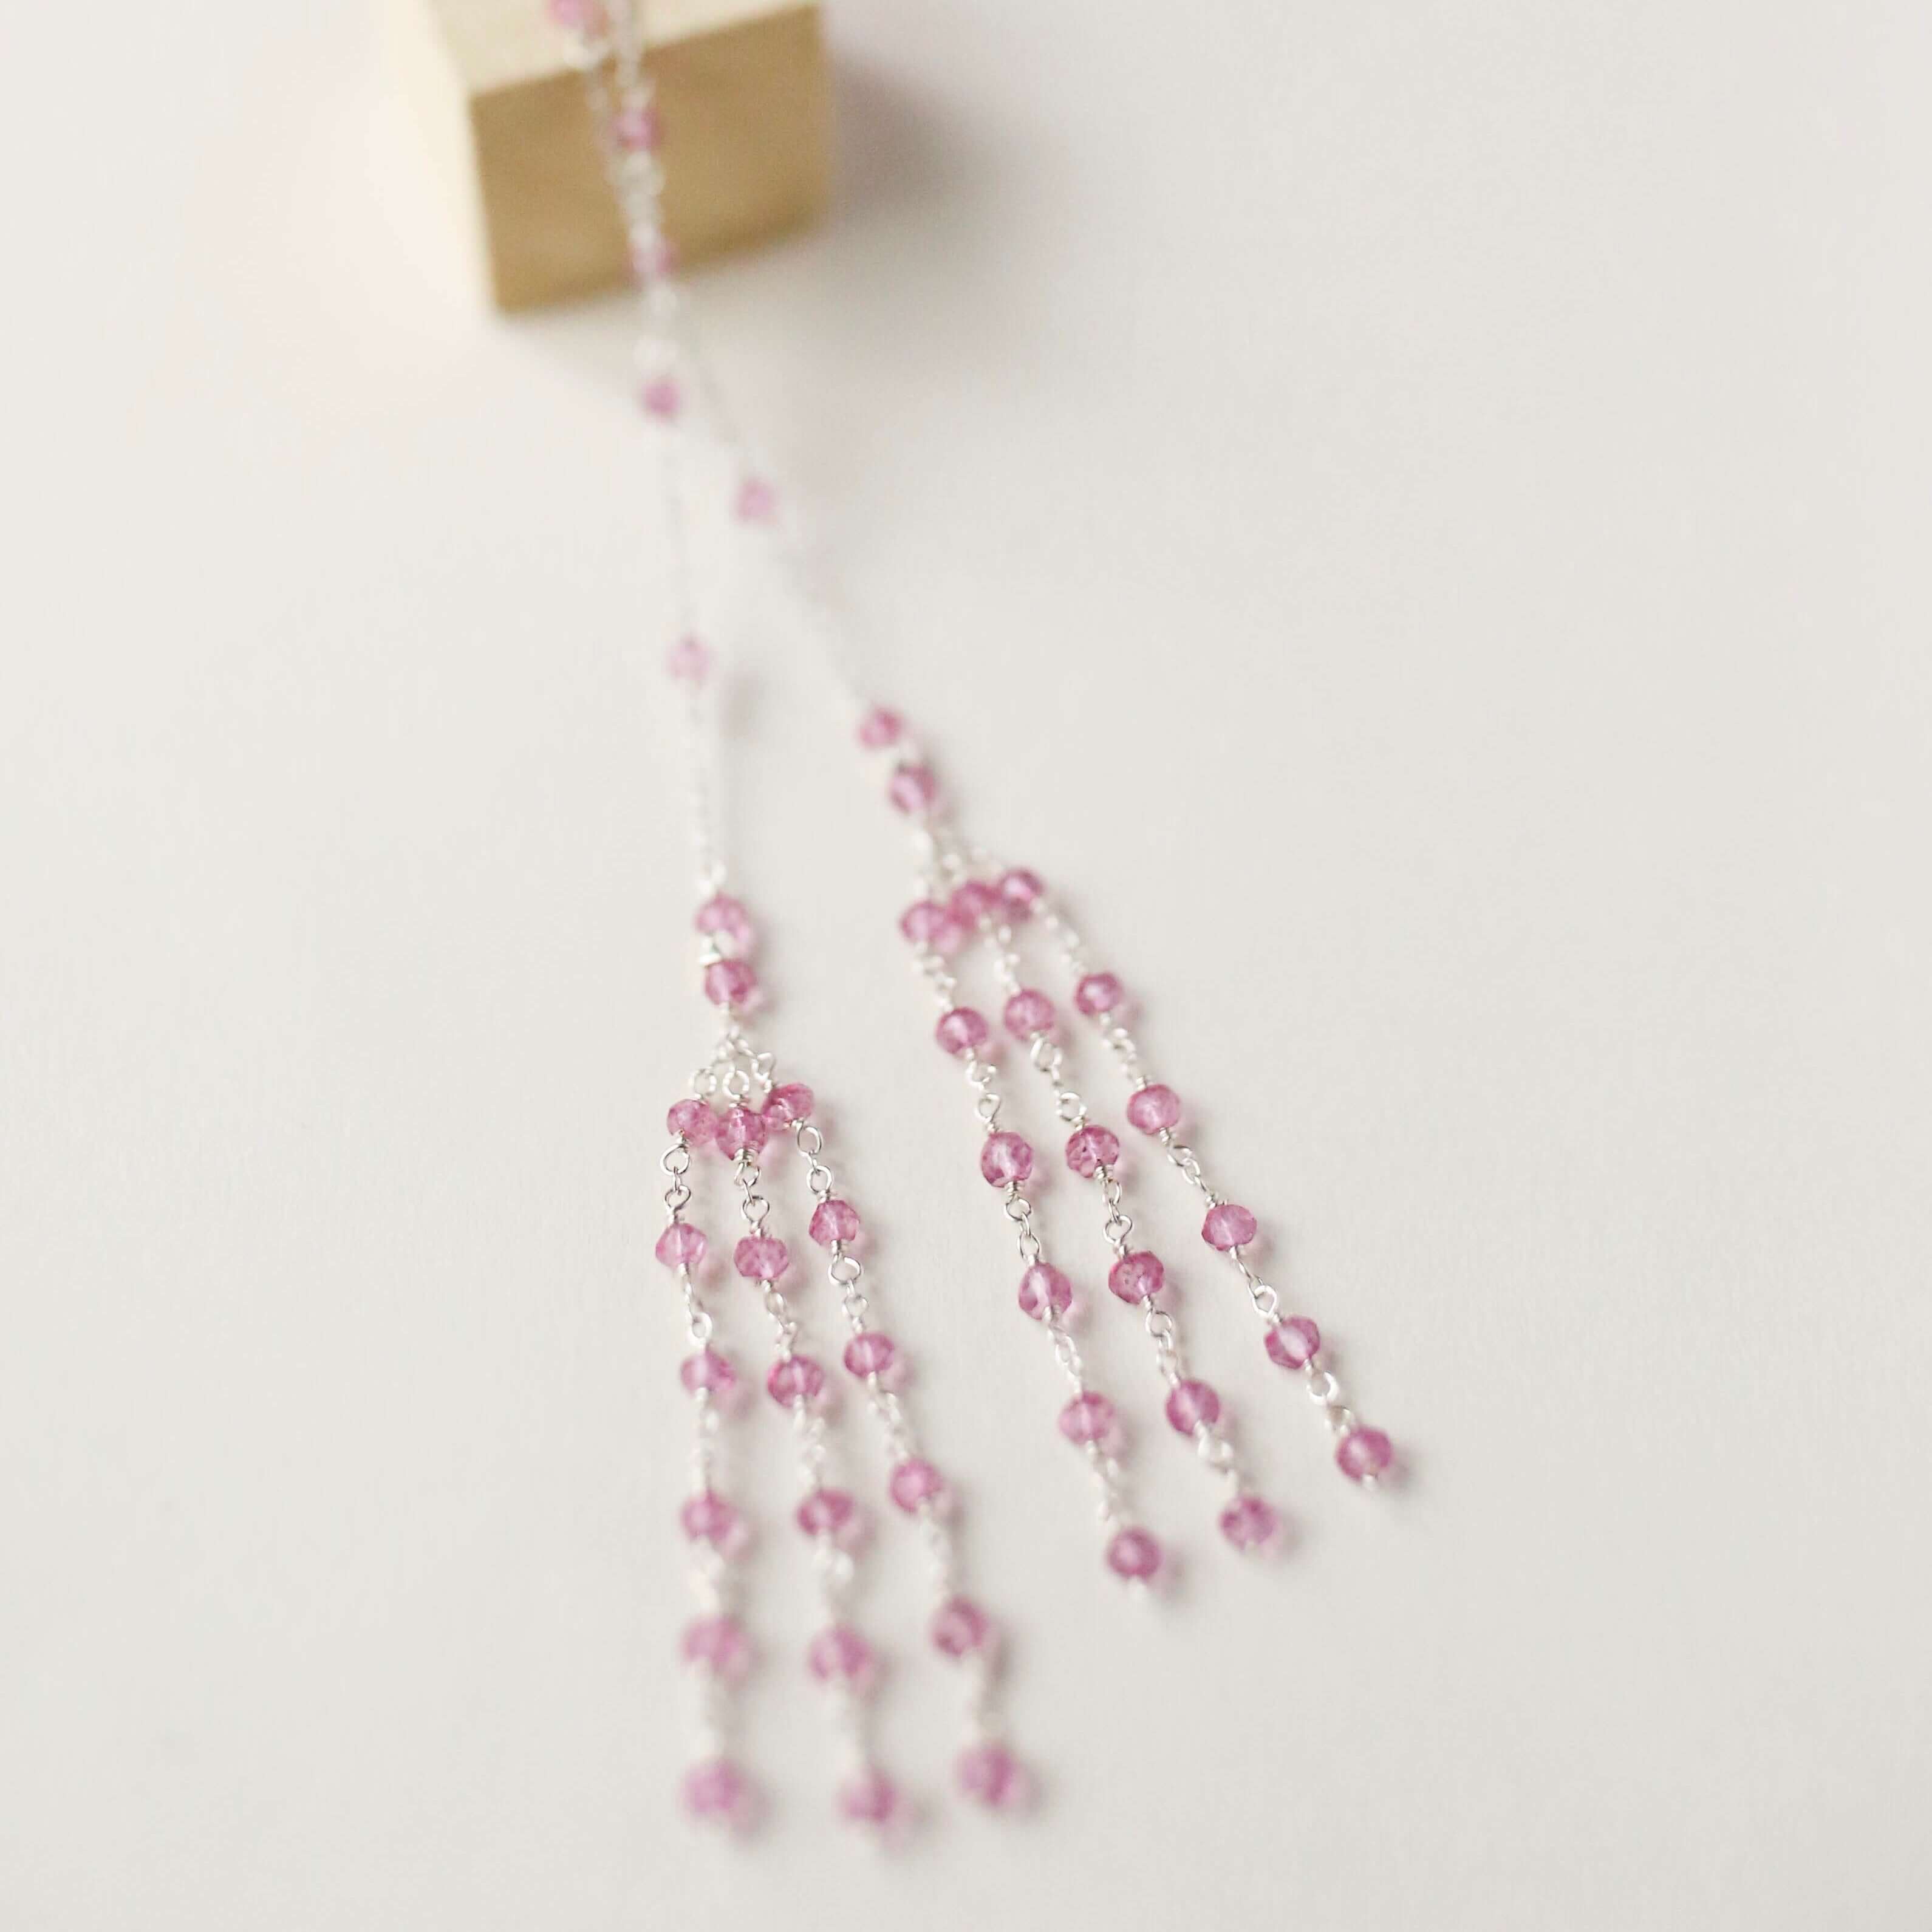 Silver plated Pink Tourmaline Lariat Necklace with a stunning tassel